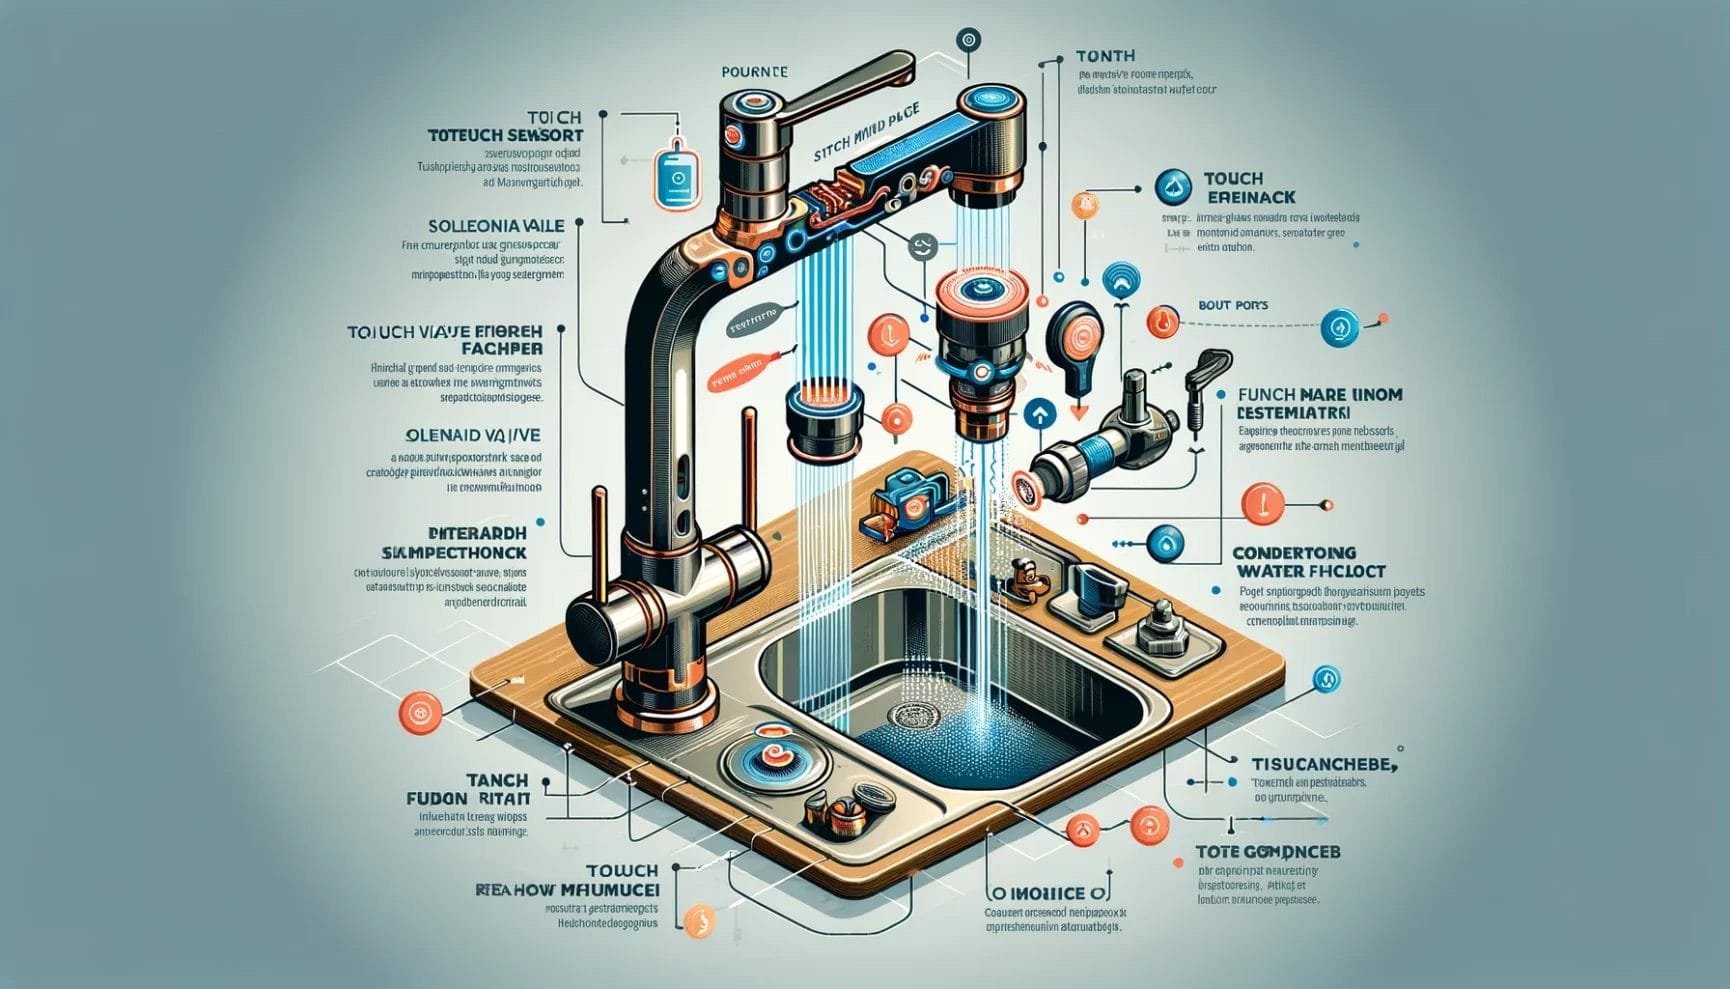 Illustration depicting the complex inner workings of a kitchen sink as a whimsical, mechanical contraption, annotated with playful technical descriptions.